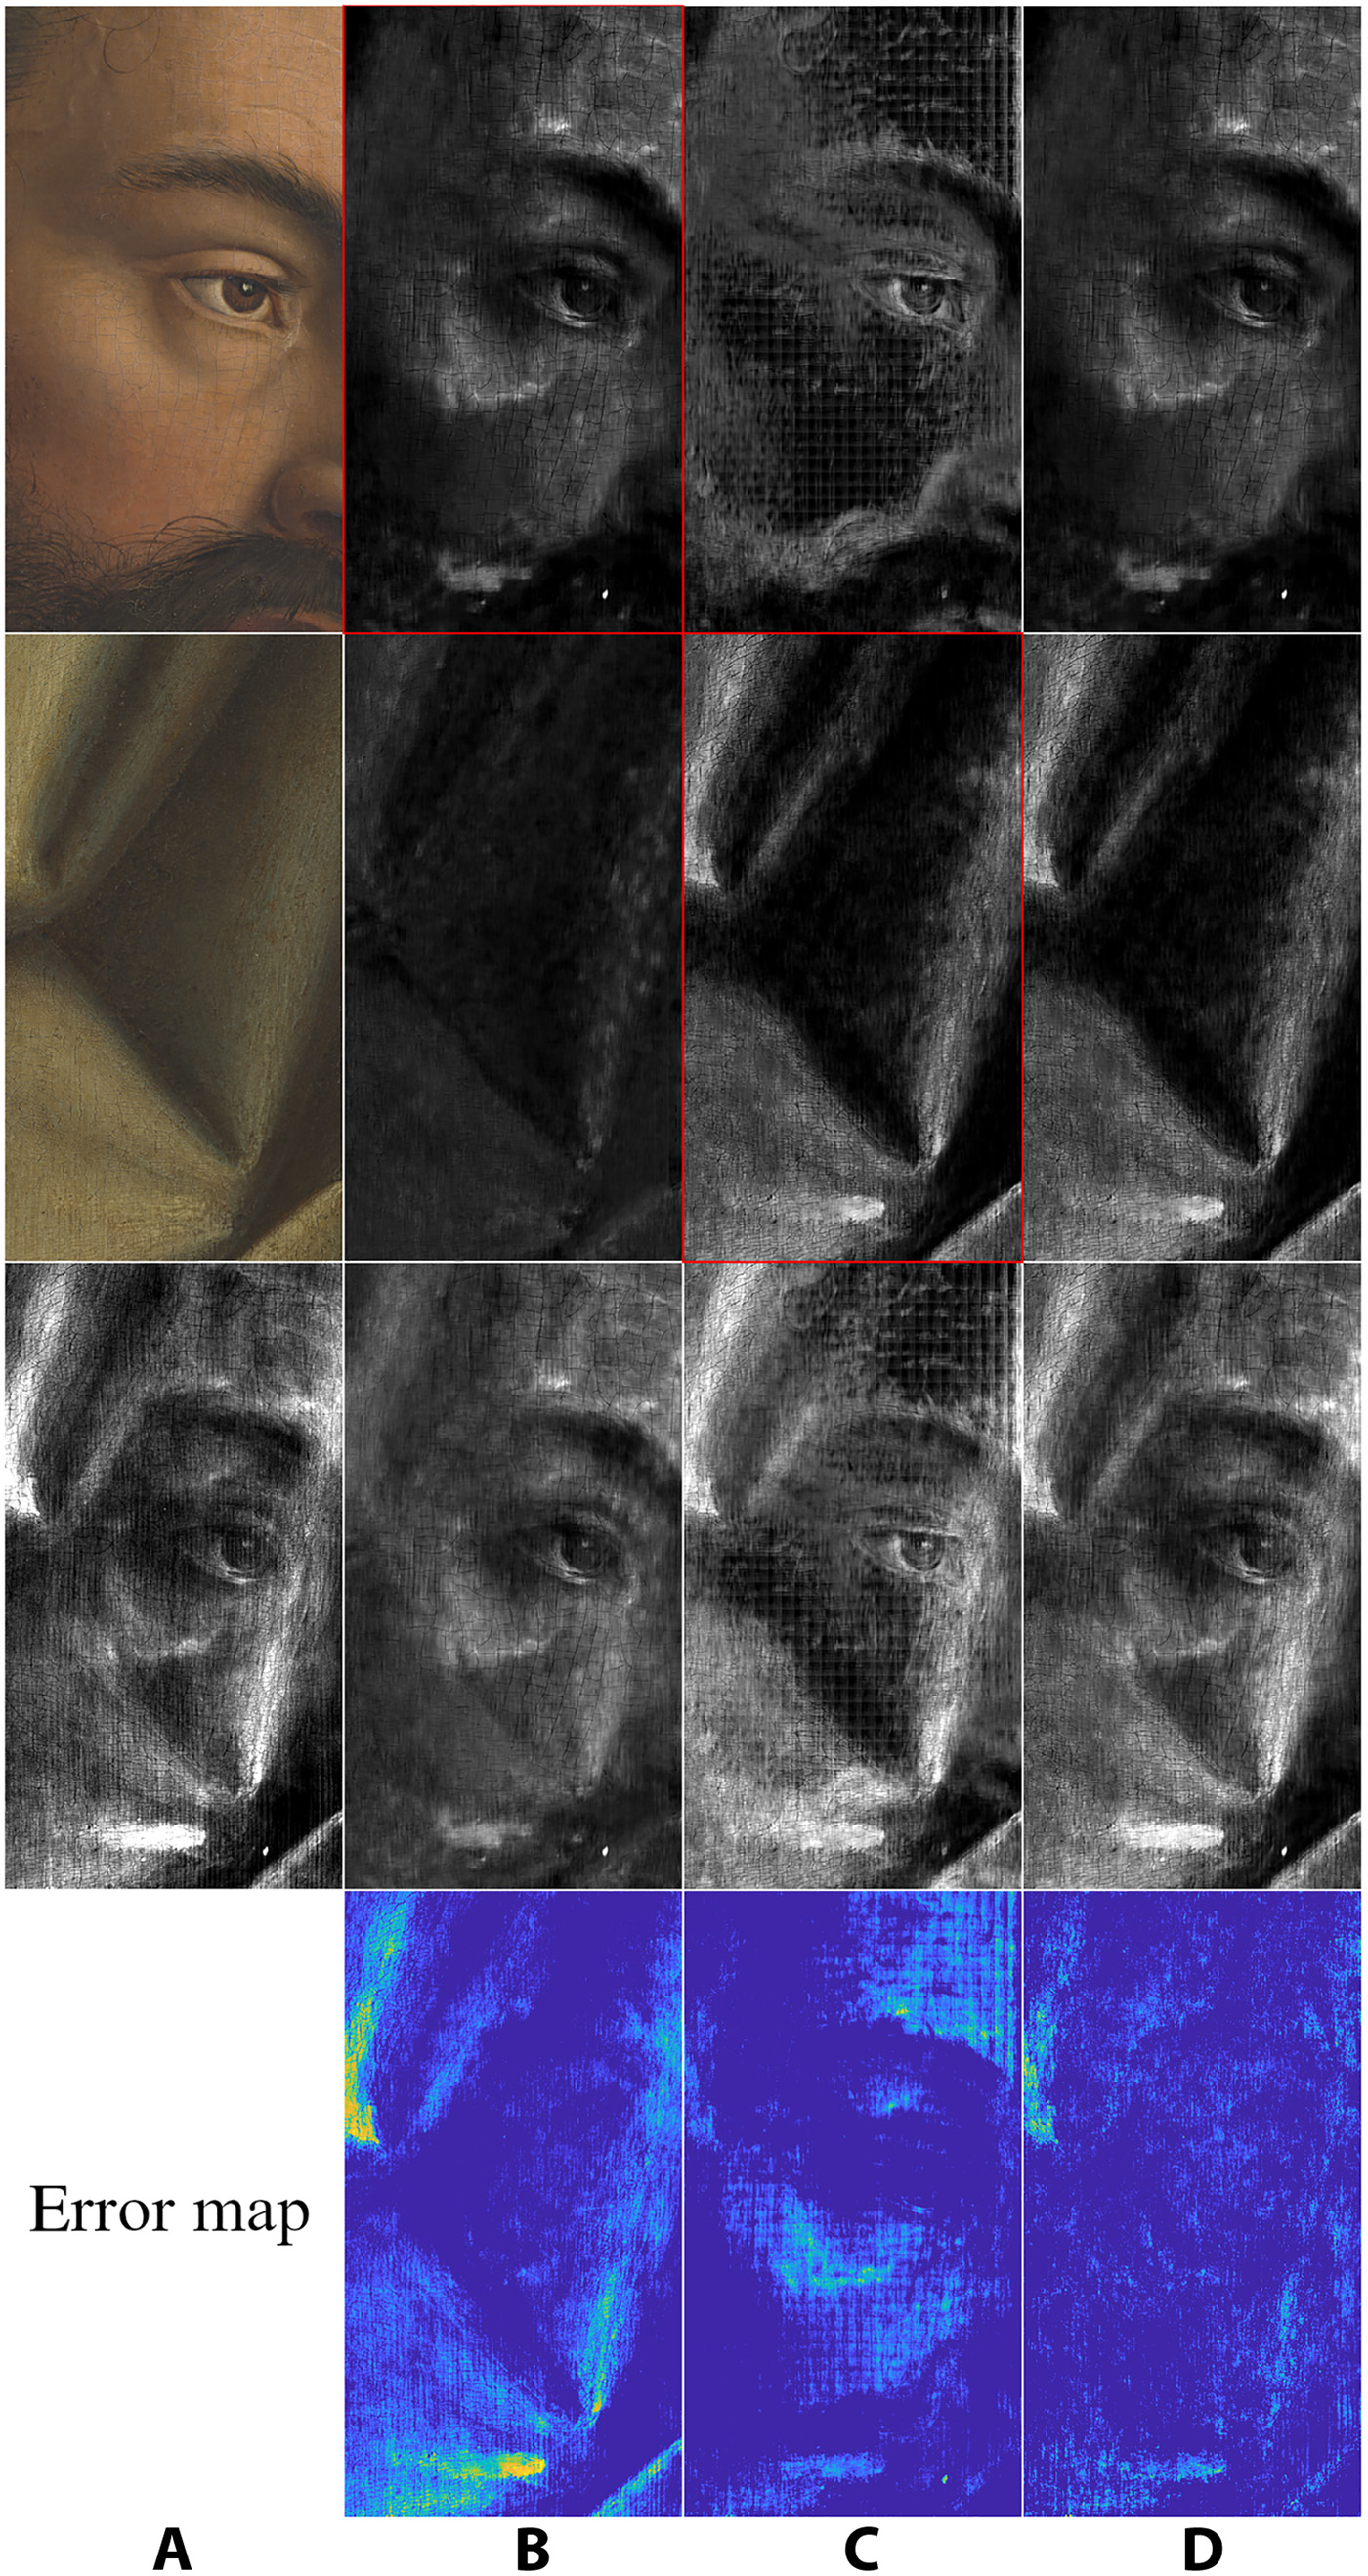 The algorithm interpreting the x-rays of a detail of Adam on the Ghent Altarpiece. The first two rows show the unmixed x-rays separating the two sides, while the third row shows the original x-ray of the full panel.